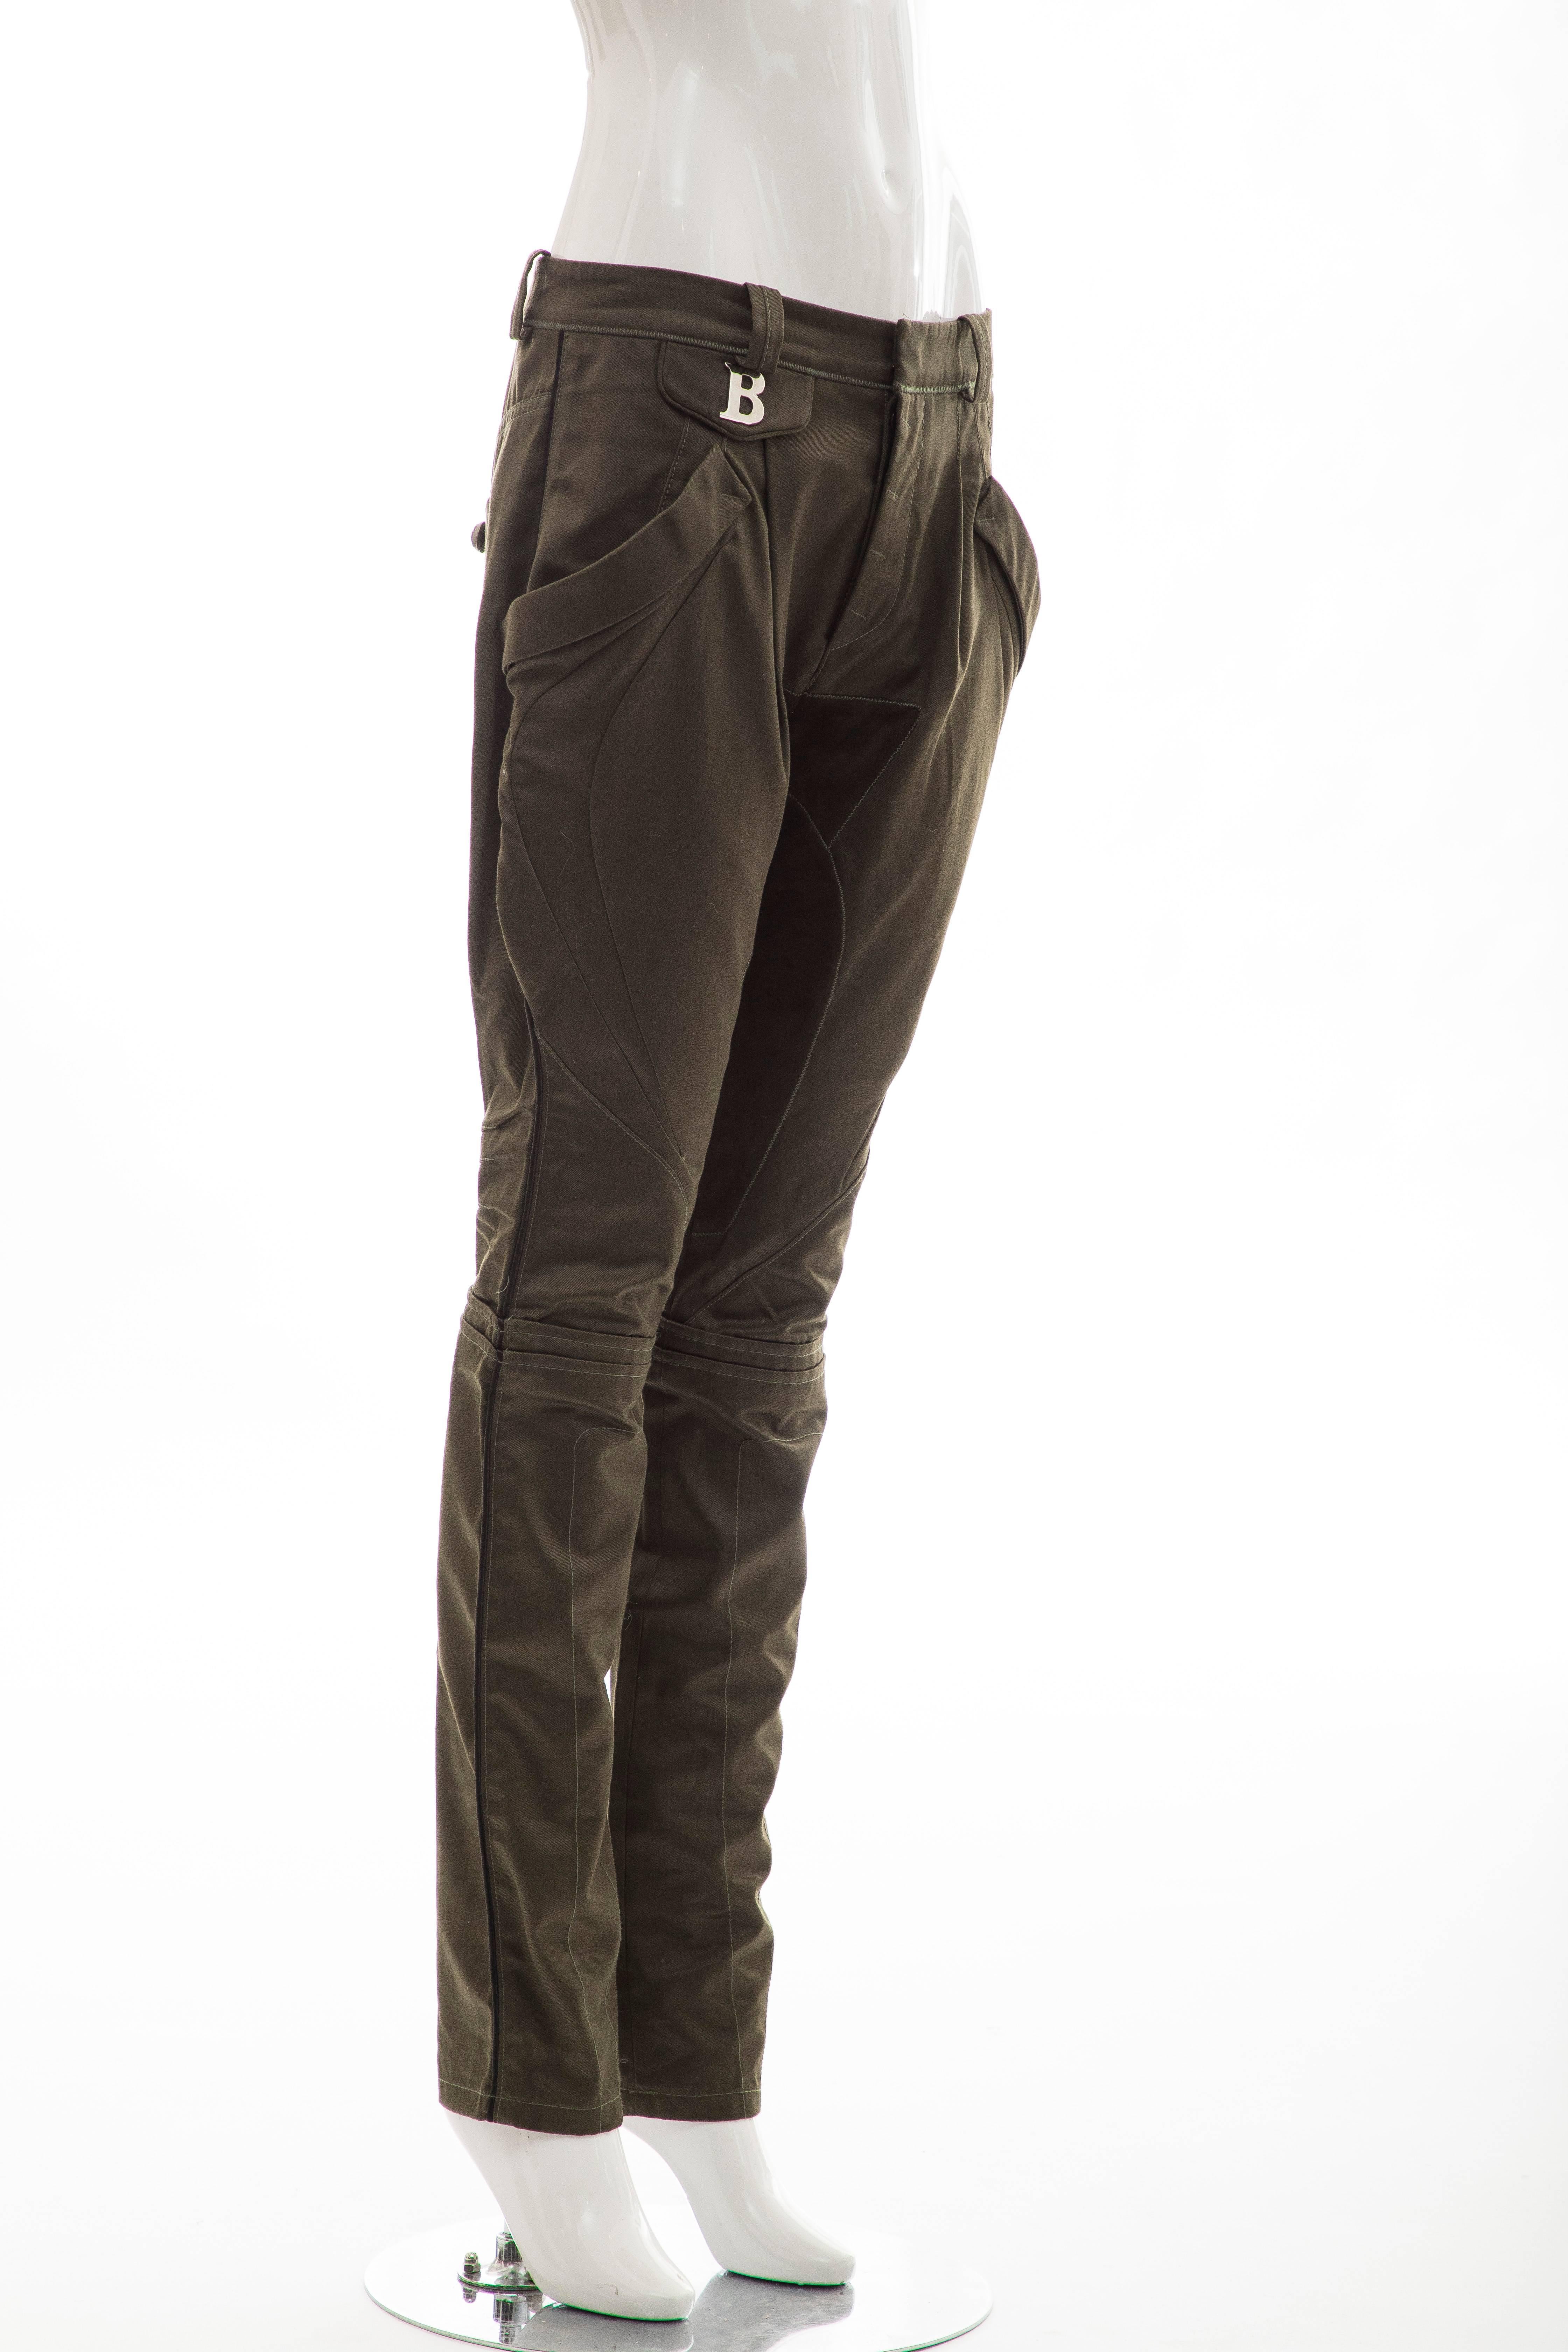 Nicolas Ghesquière For Balenciaga, Fall 2007 cotton olive green pants with suede accents at inseam, four pockets and button closures at front.

FR. 38, US. 6

Waist: 31, Hip: 38, Rise: 10.5, Inseam: 31.5, Leg Opening: 12
